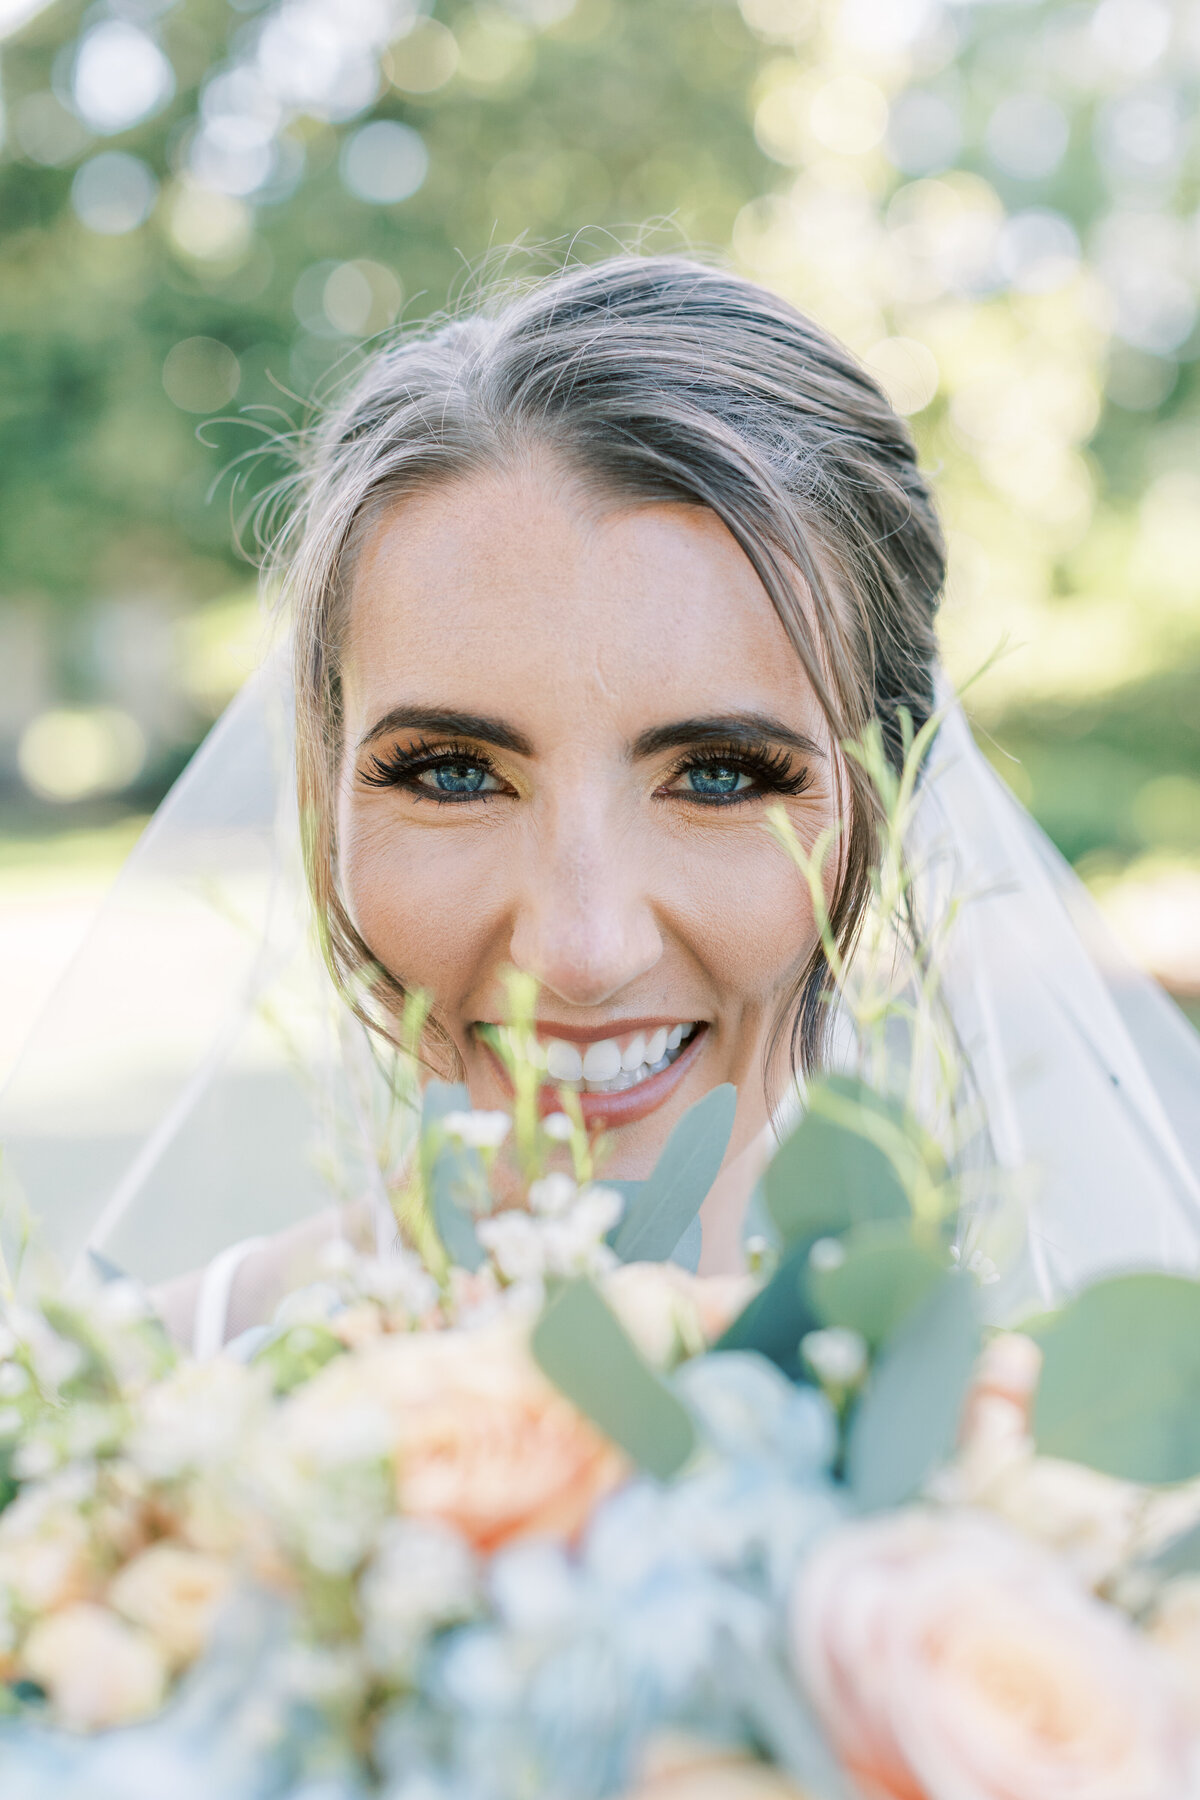 A bride smiles with her blue eyes.